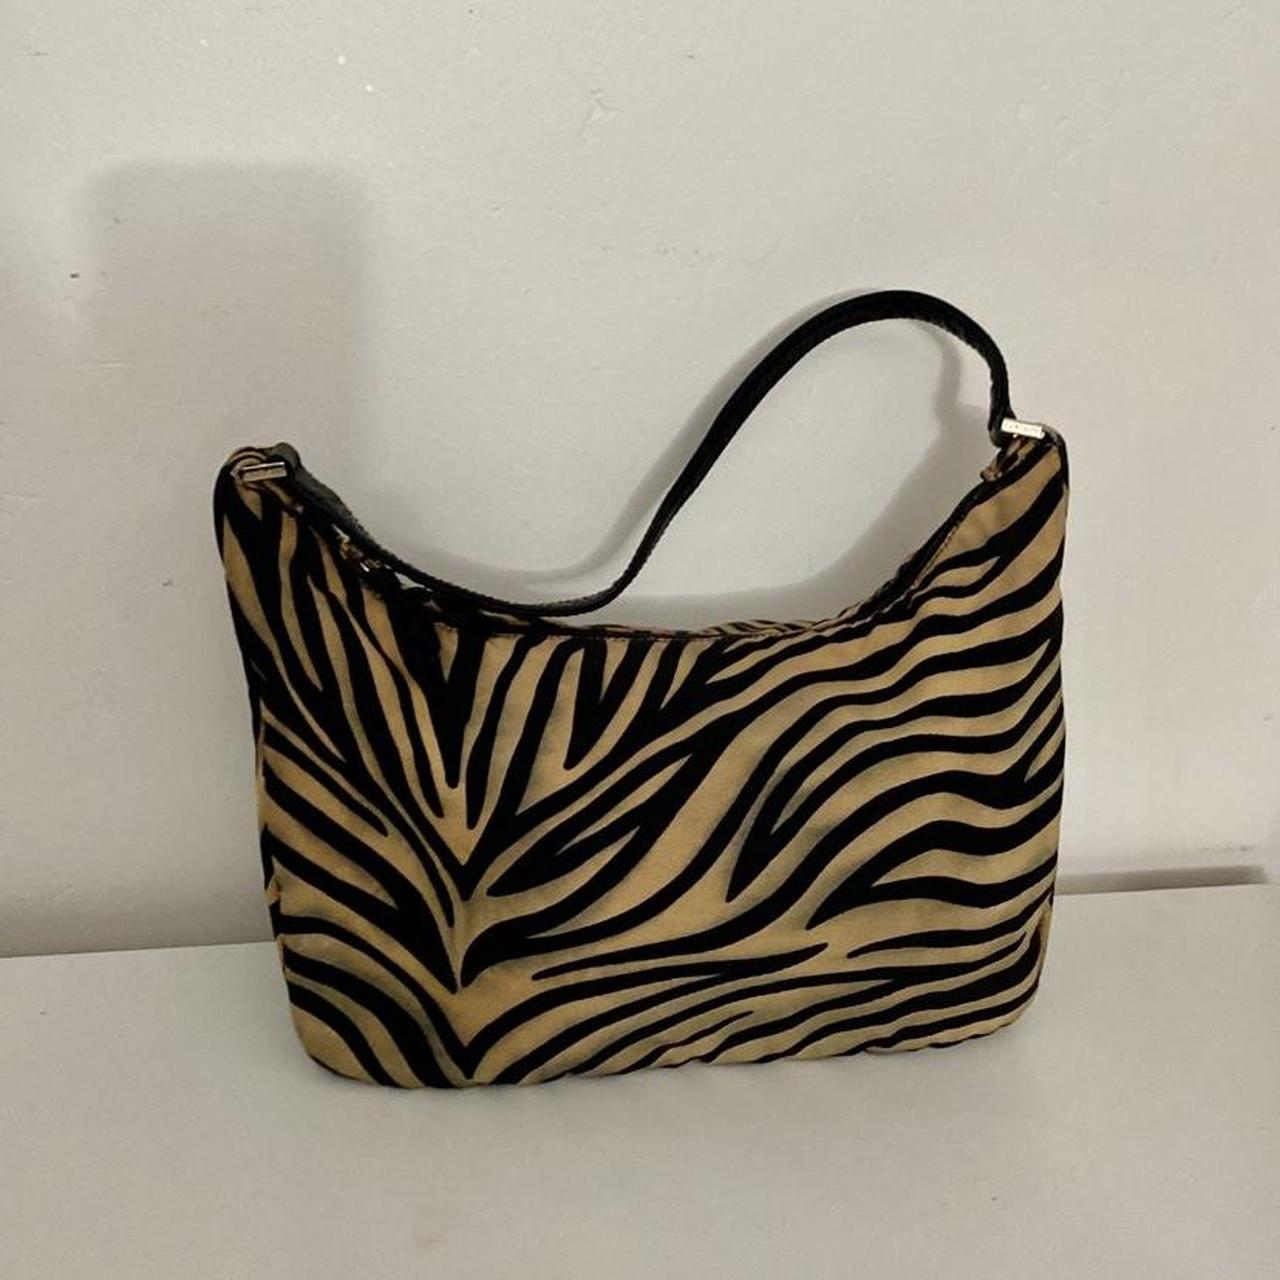 Kate spade purse Never used it, don't have the tags - Depop